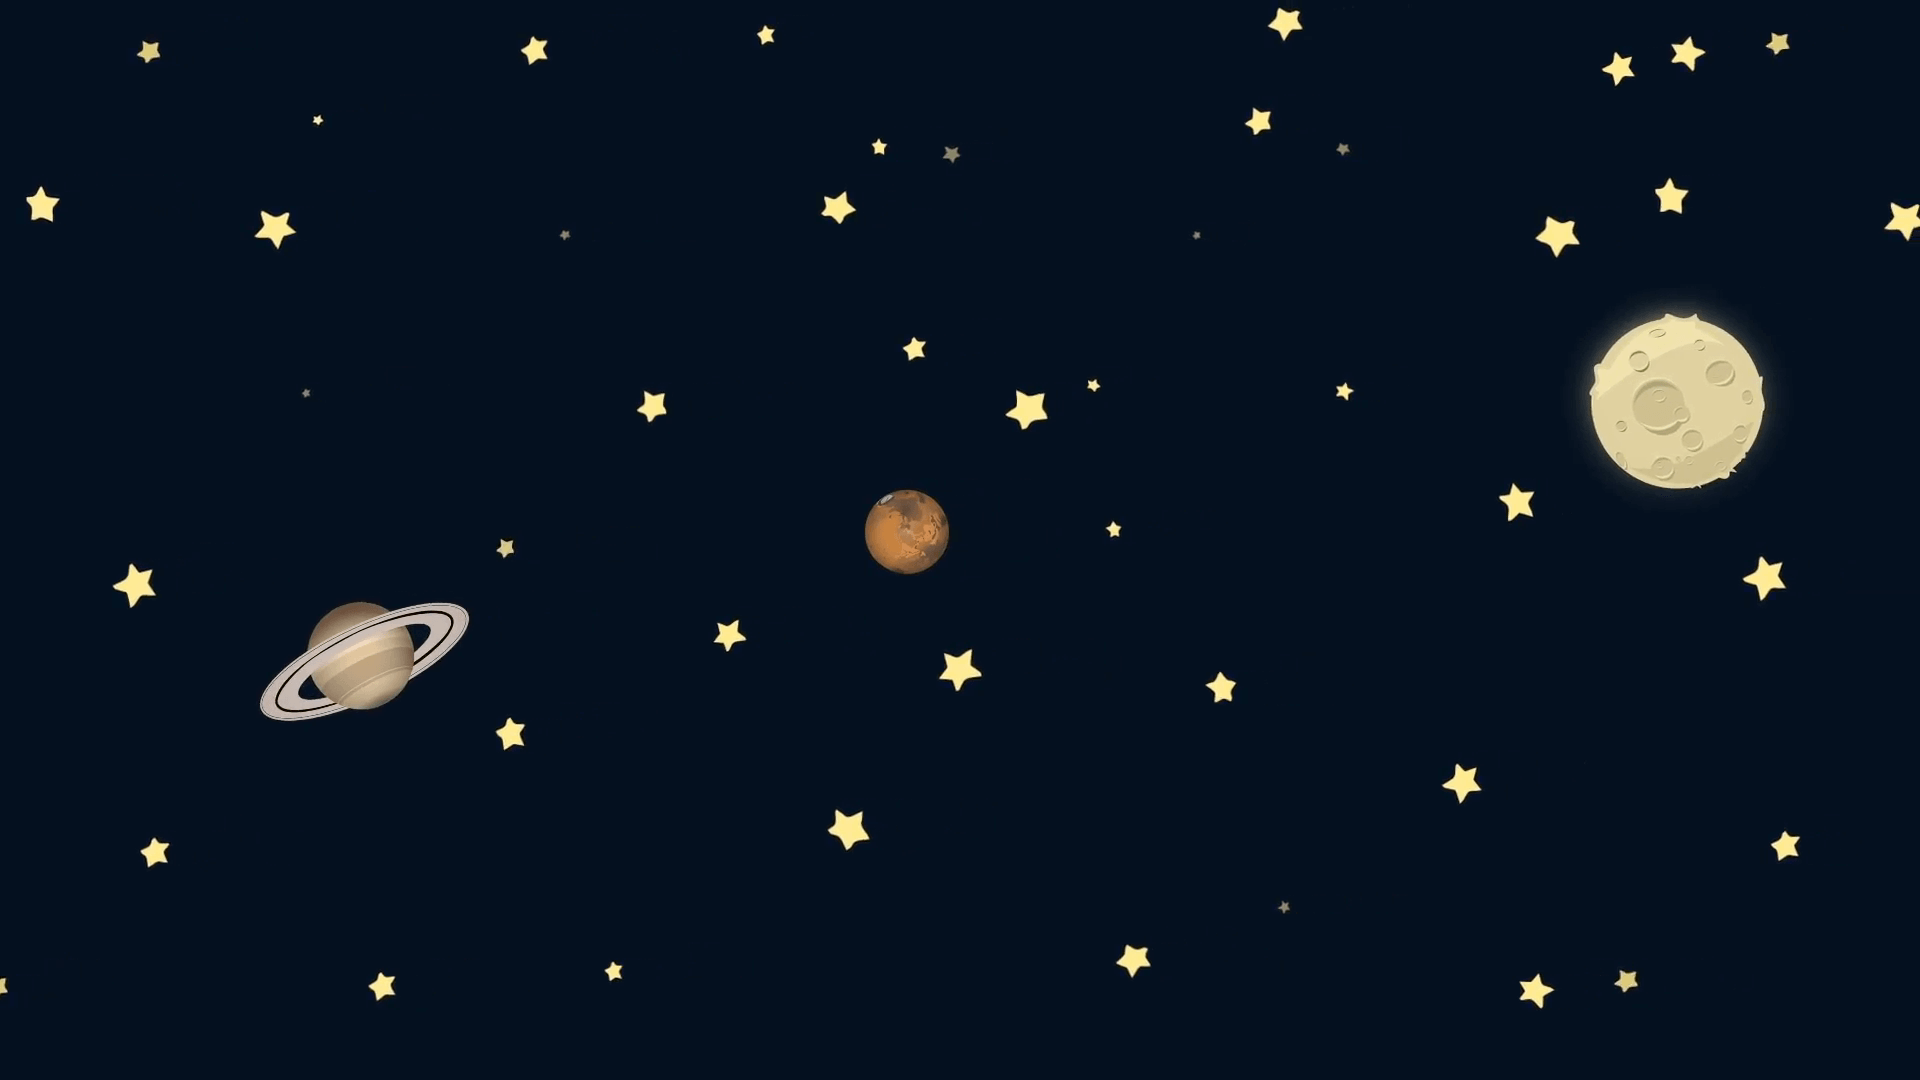 Outer Space Wallpaper Cartoon | Hatake Wallpapers